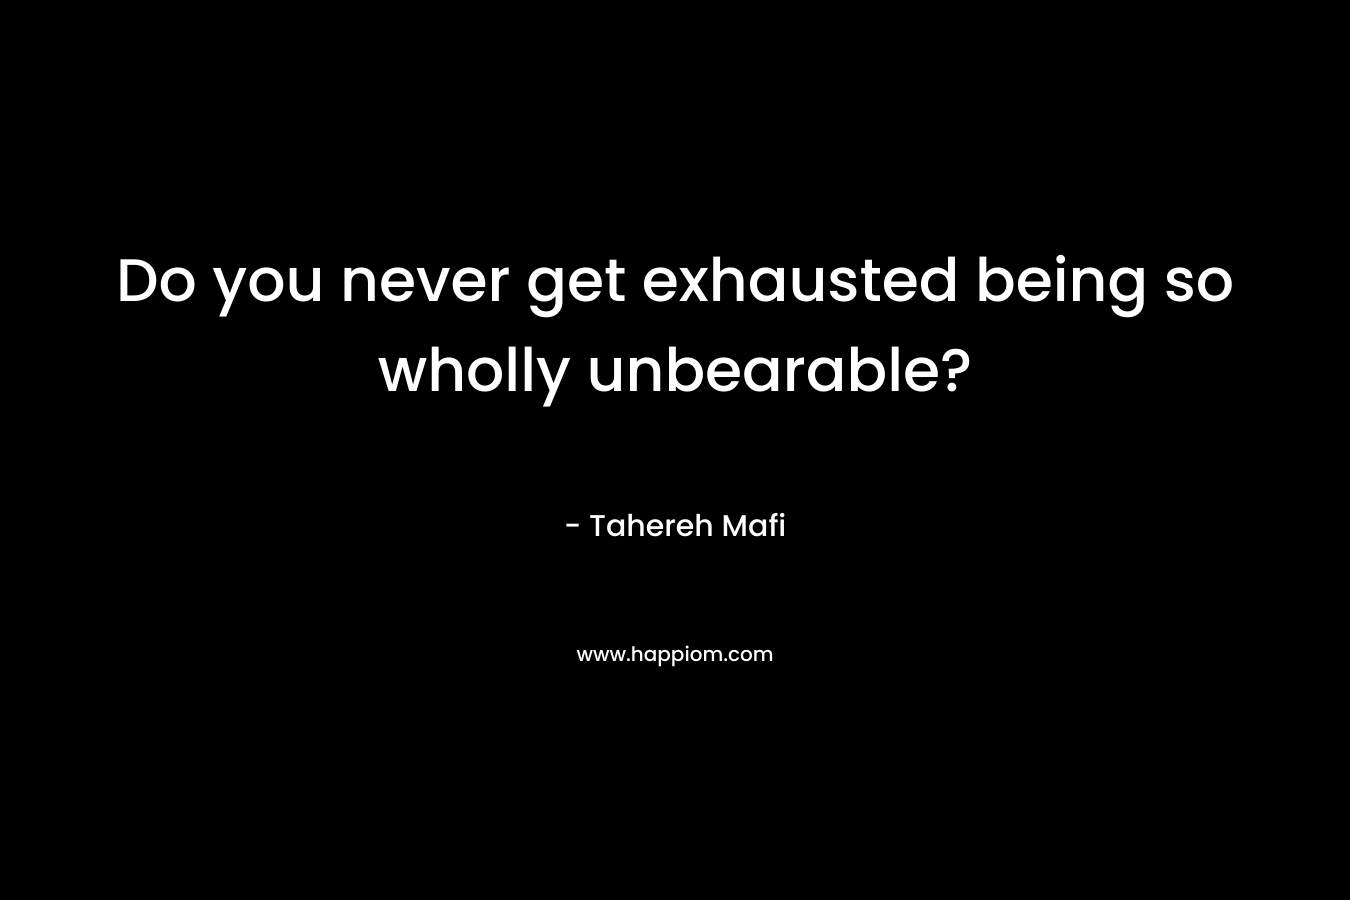 Do you never get exhausted being so wholly unbearable?